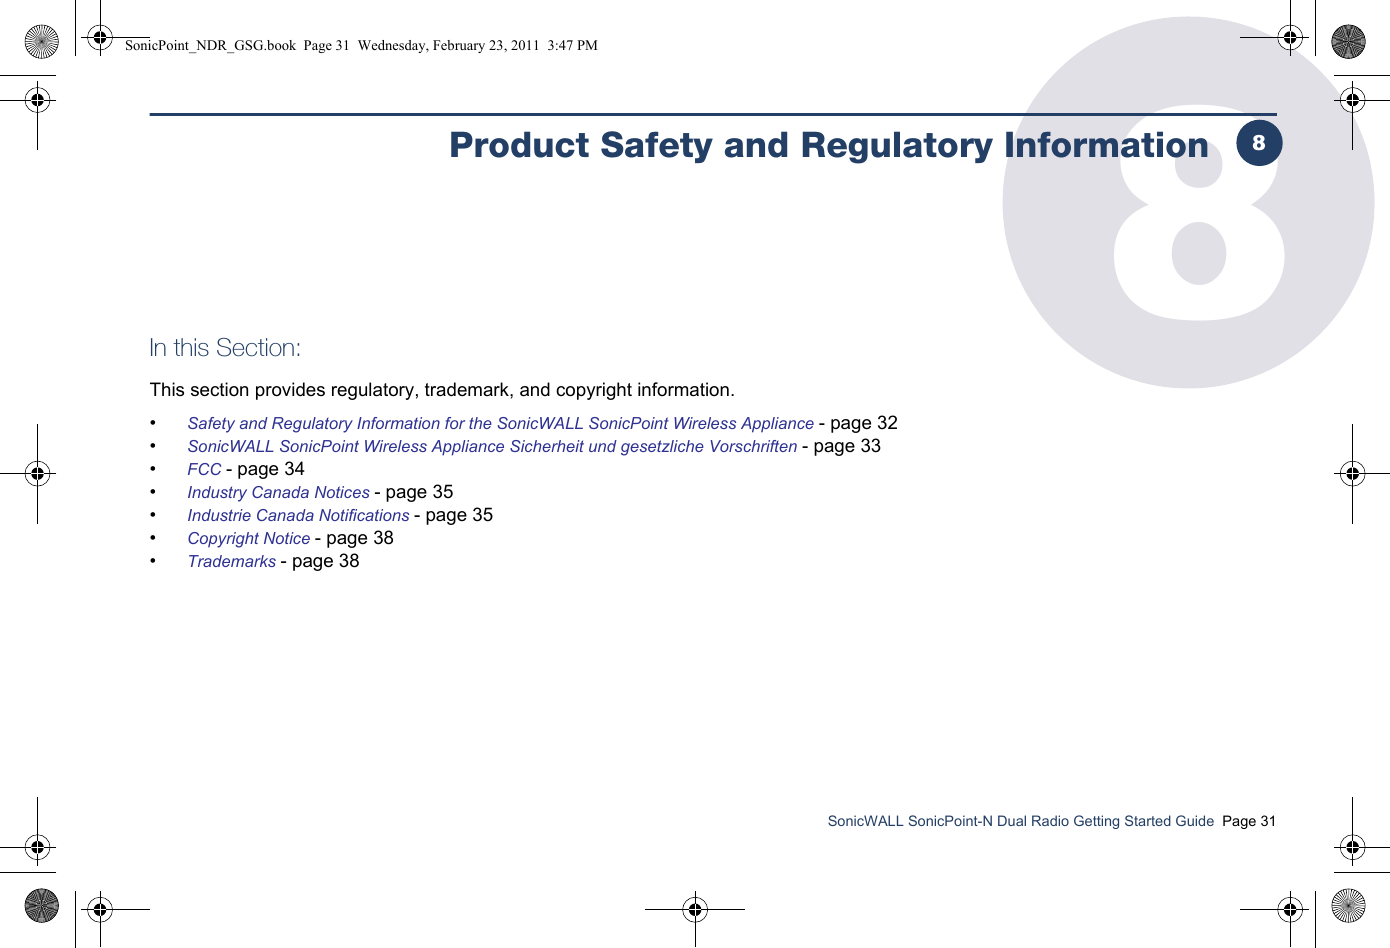 SonicWALL SonicPoint-N Dual Radio Getting Started Guide  Page 318Product Safety and Regulatory InformationIn this Section:This section provides regulatory, trademark, and copyright information.•Safety and Regulatory Information for the SonicWALL SonicPoint Wireless Appliance - page 32•SonicWALL SonicPoint Wireless Appliance Sicherheit und gesetzliche Vorschriften - page 33•FCC - page 34•Industry Canada Notices - page 35•Industrie Canada Notifications - page 35•Copyright Notice - page 38•Trademarks - page 388SonicPoint_NDR_GSG.book  Page 31  Wednesday, February 23, 2011  3:47 PM